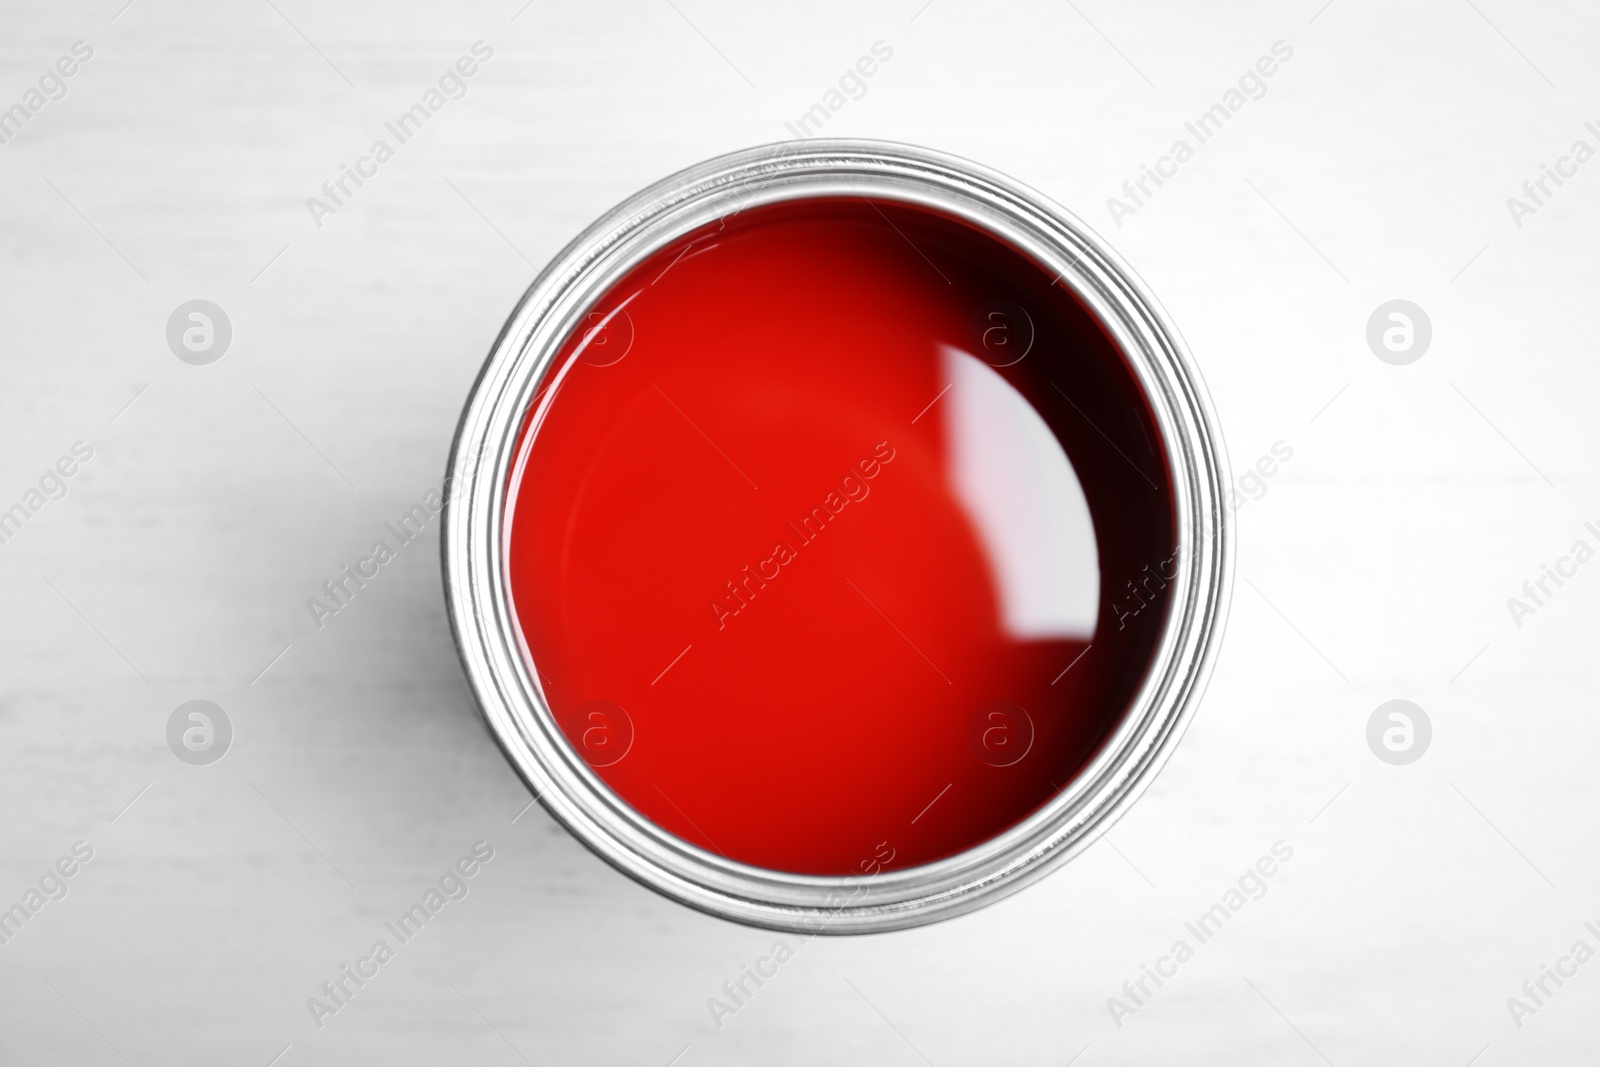 Photo of Can with red paint on wooden background, top view